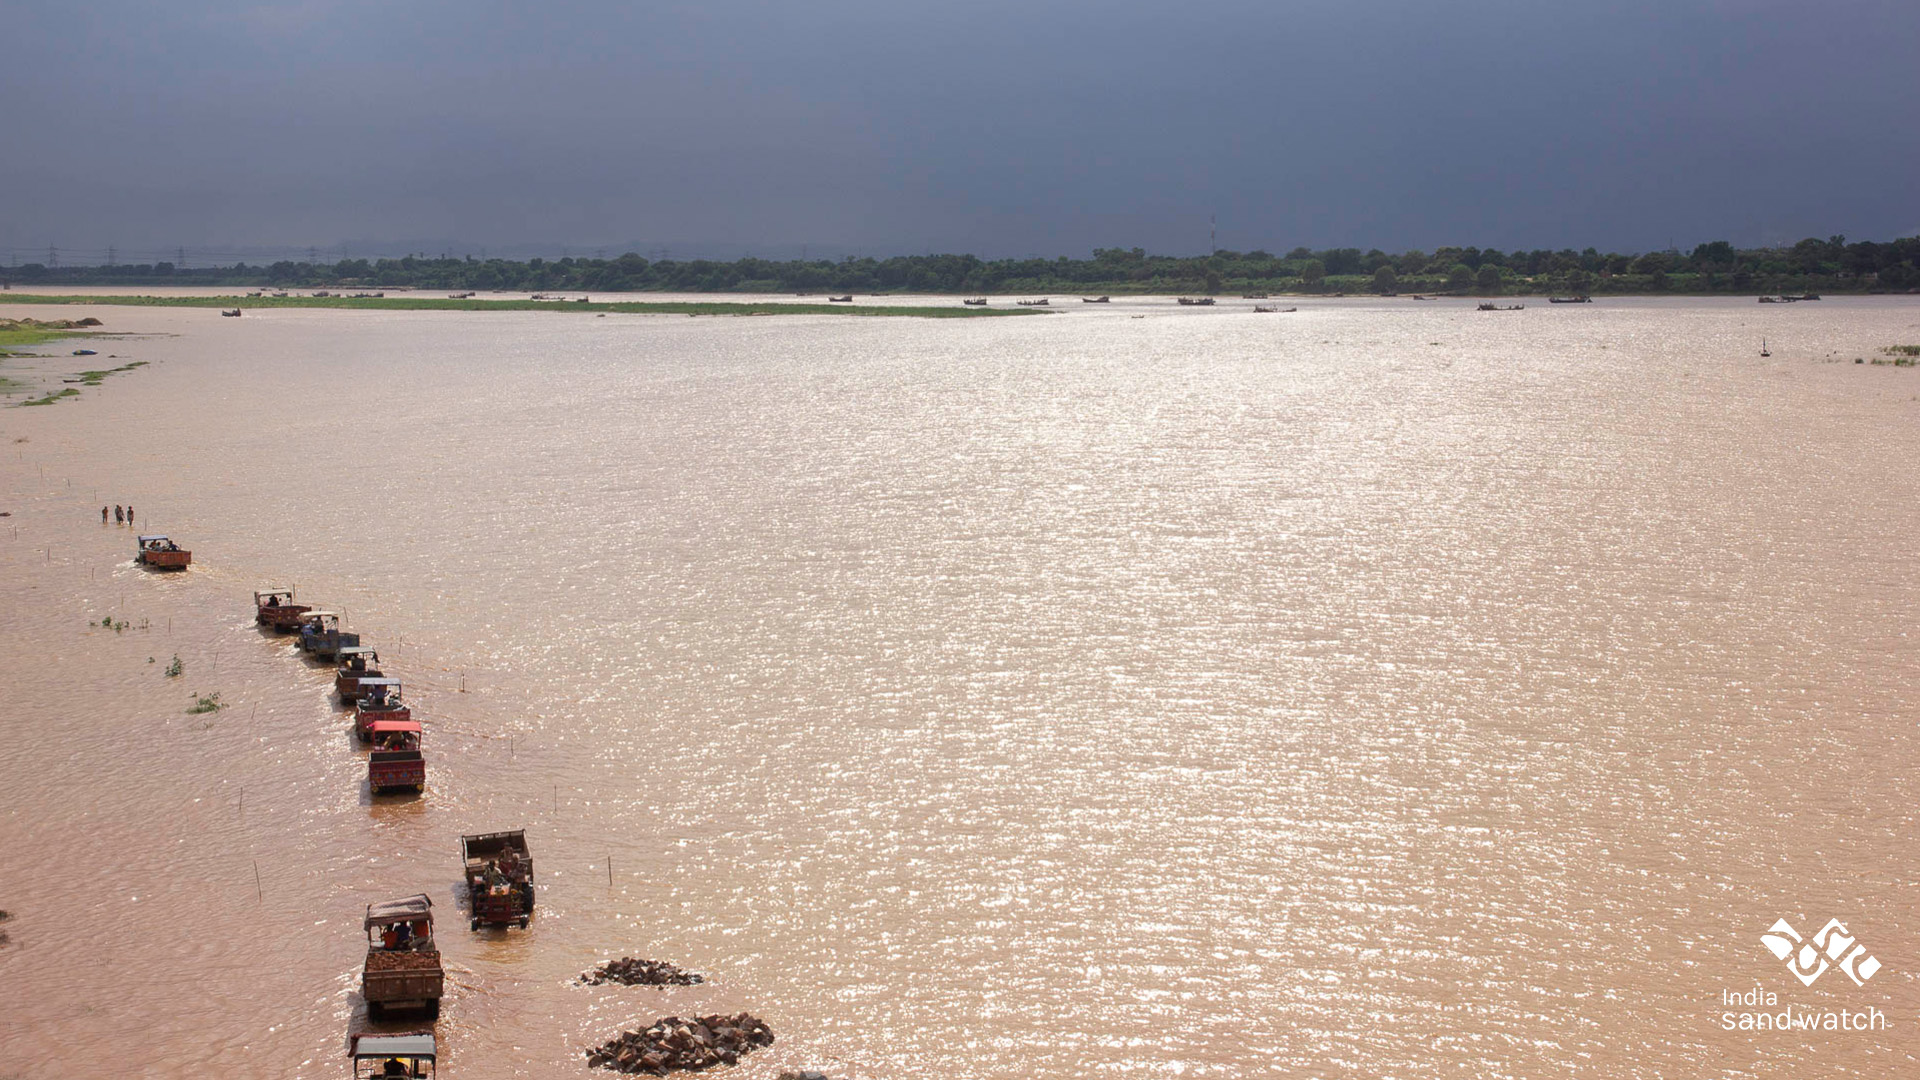 <p>Tractors carry away sand extracted from the River Sone in central India (Image: India Sand Watch)</p>